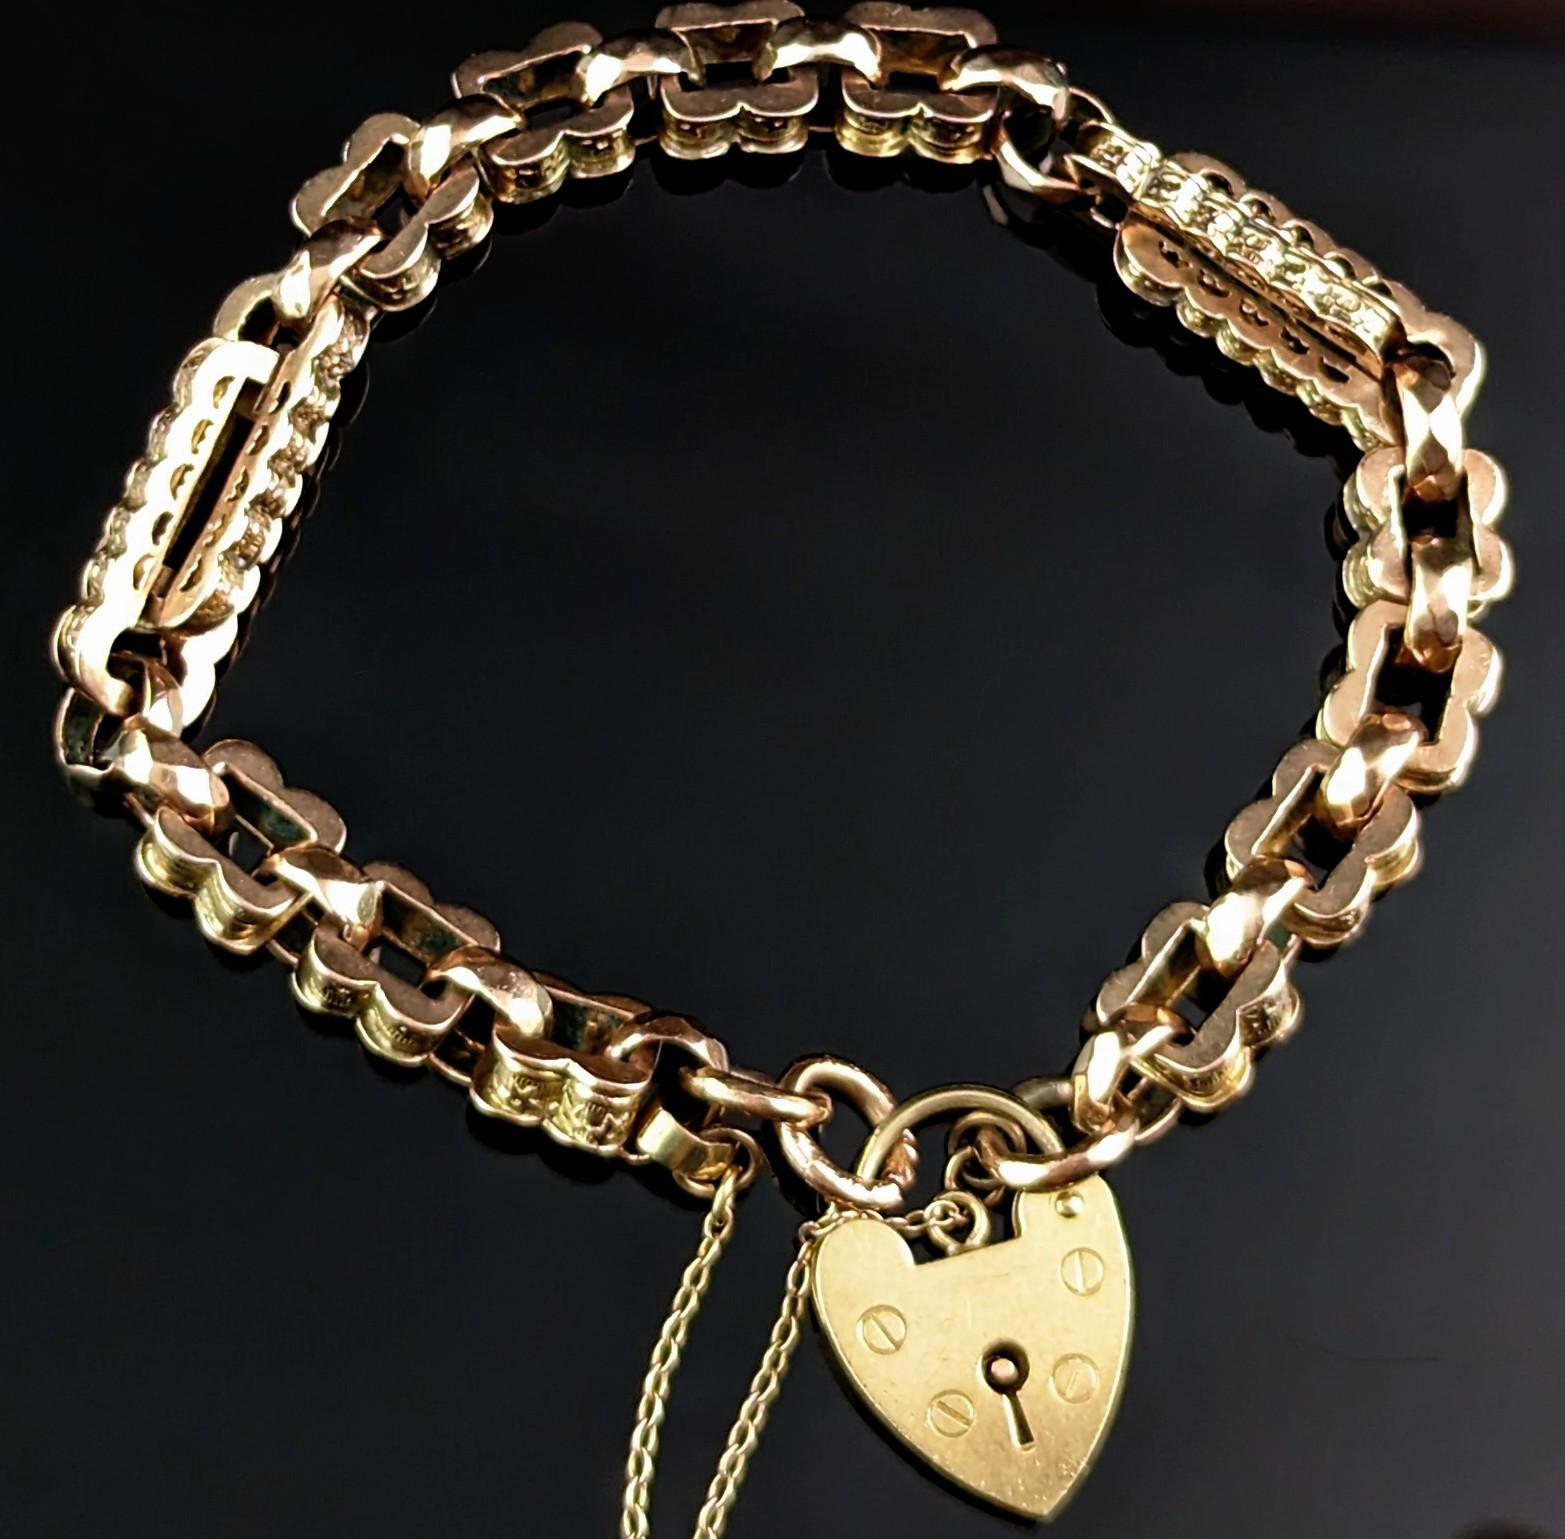 You can't go wrong with this gorgeous antique, Victorian era 9ct gold fancy link bracelet.

The bracelet is made up from fancy engraved and interlocking bar style links, punched with a star design giving it a nice celestial touch.

It is crafted in